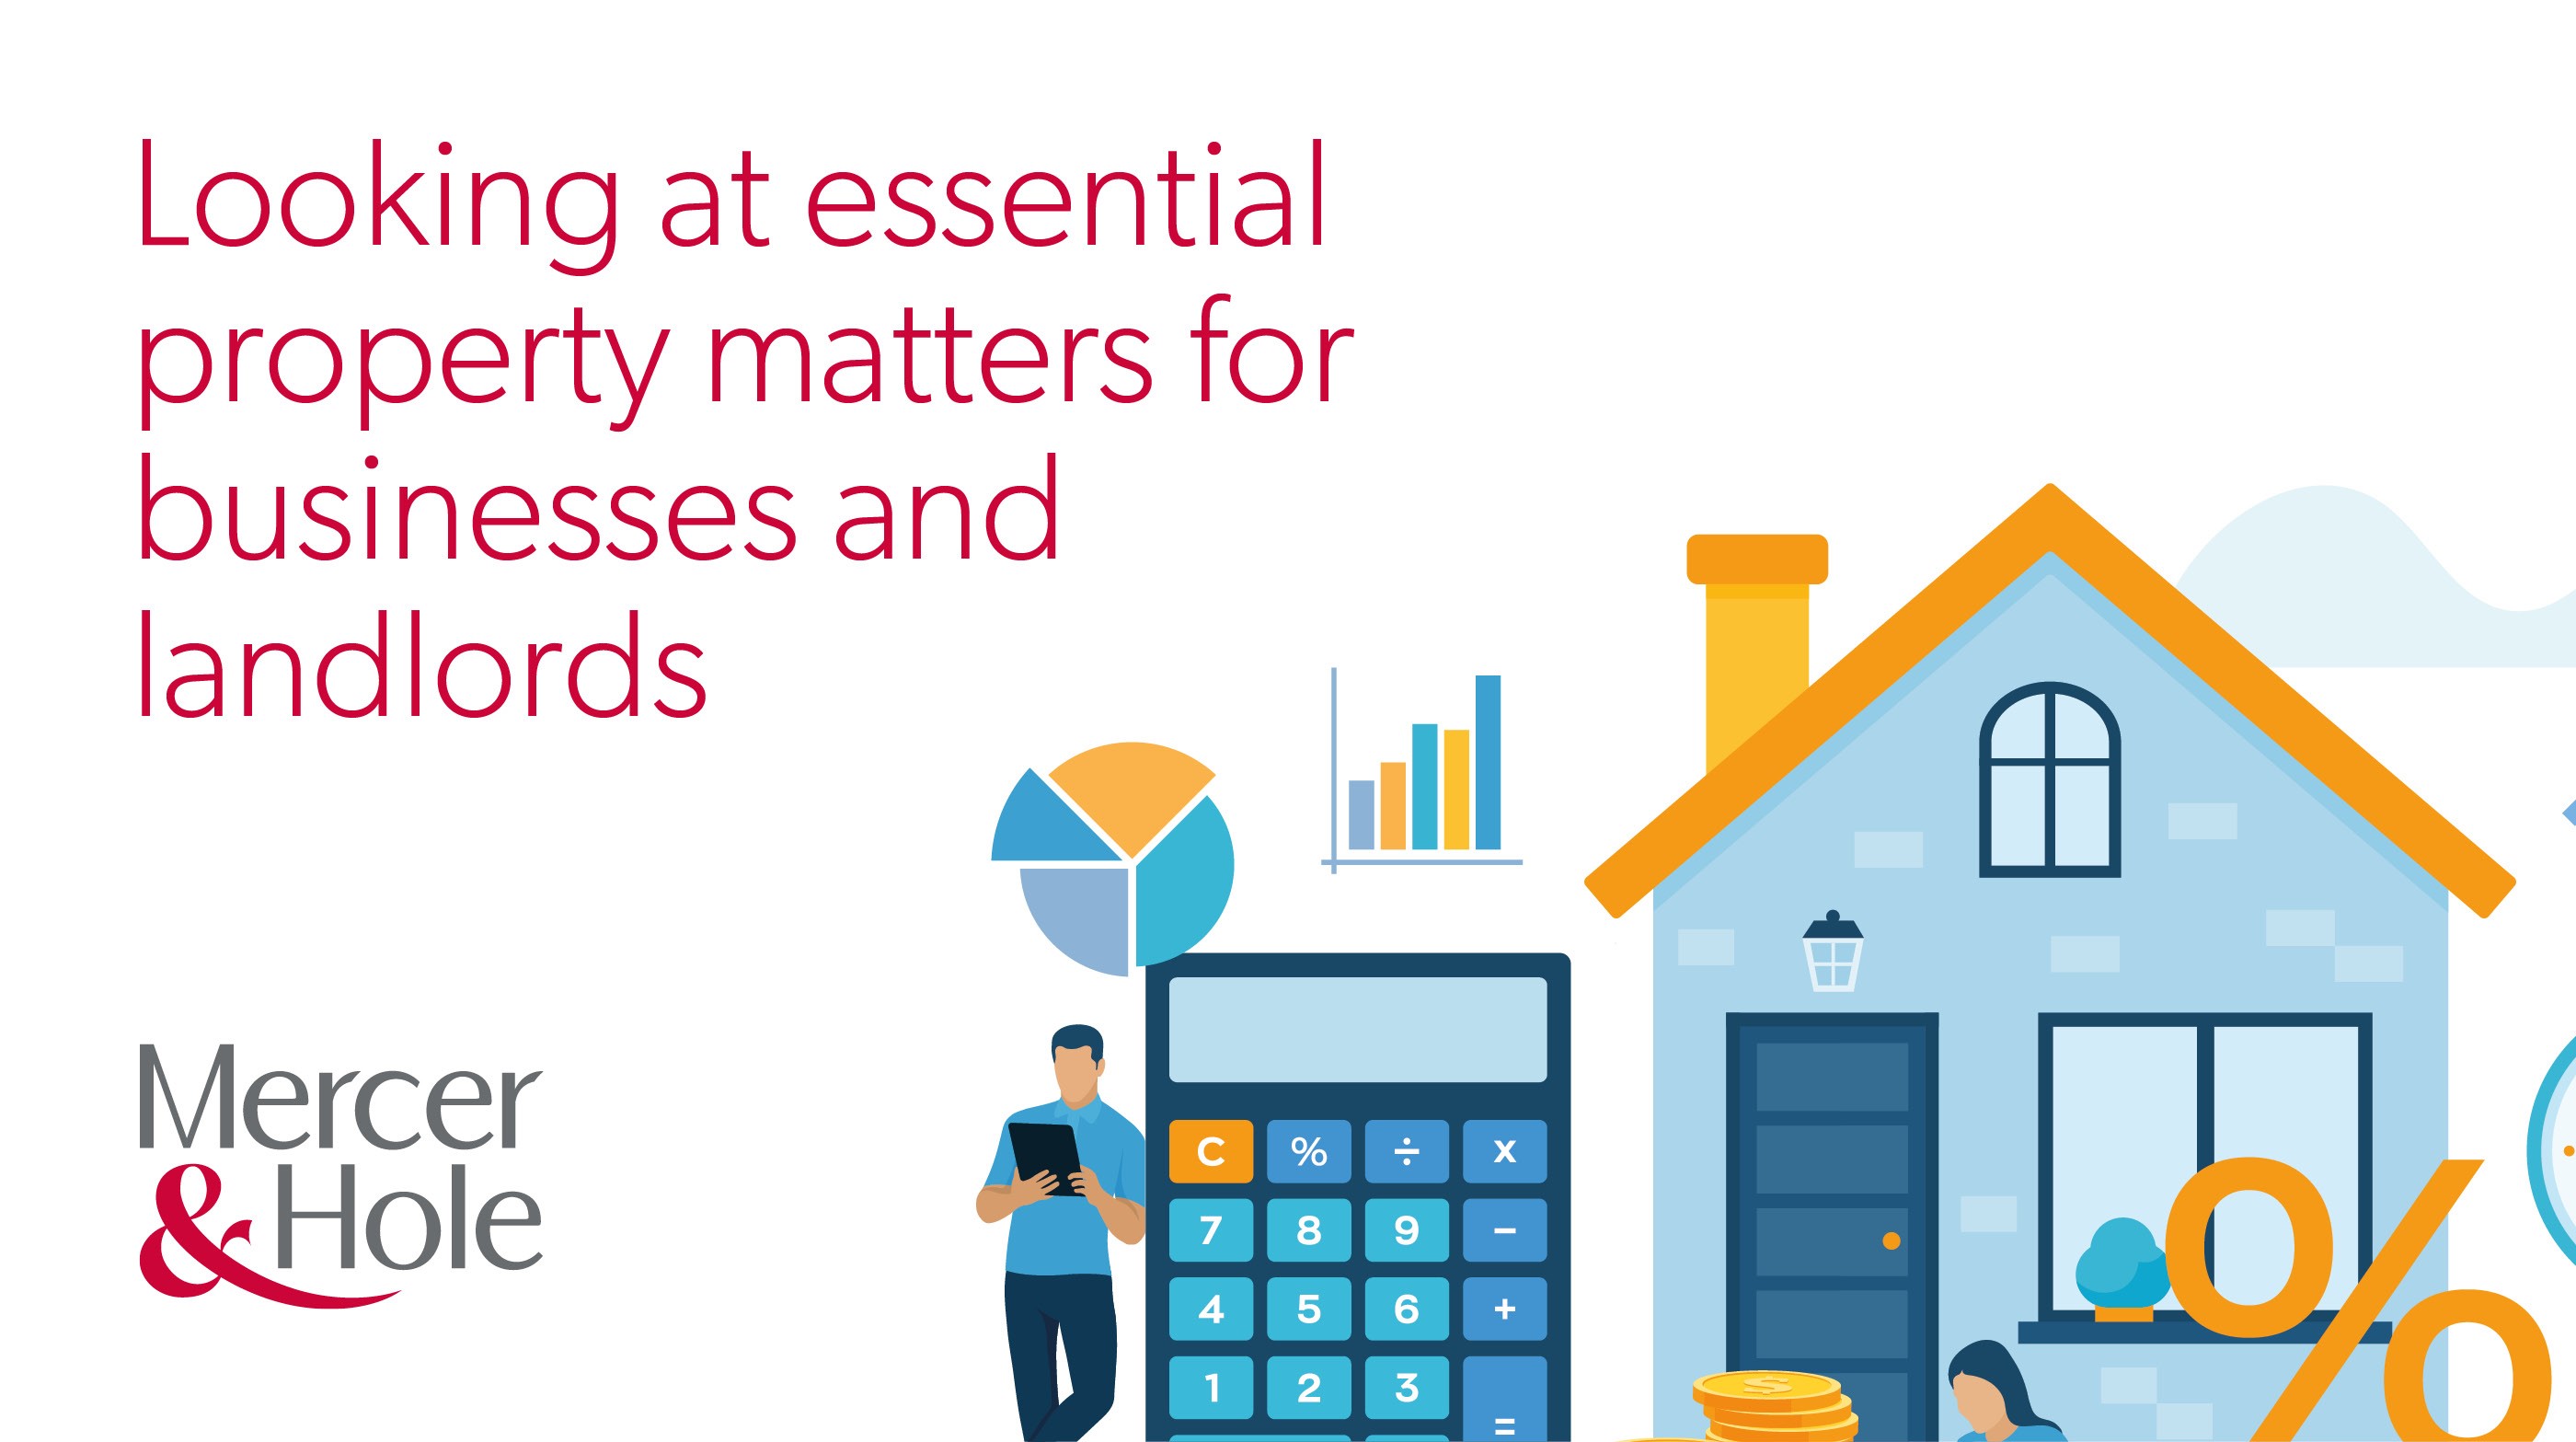 Looking at essential property matters for businesses and landlords webinar